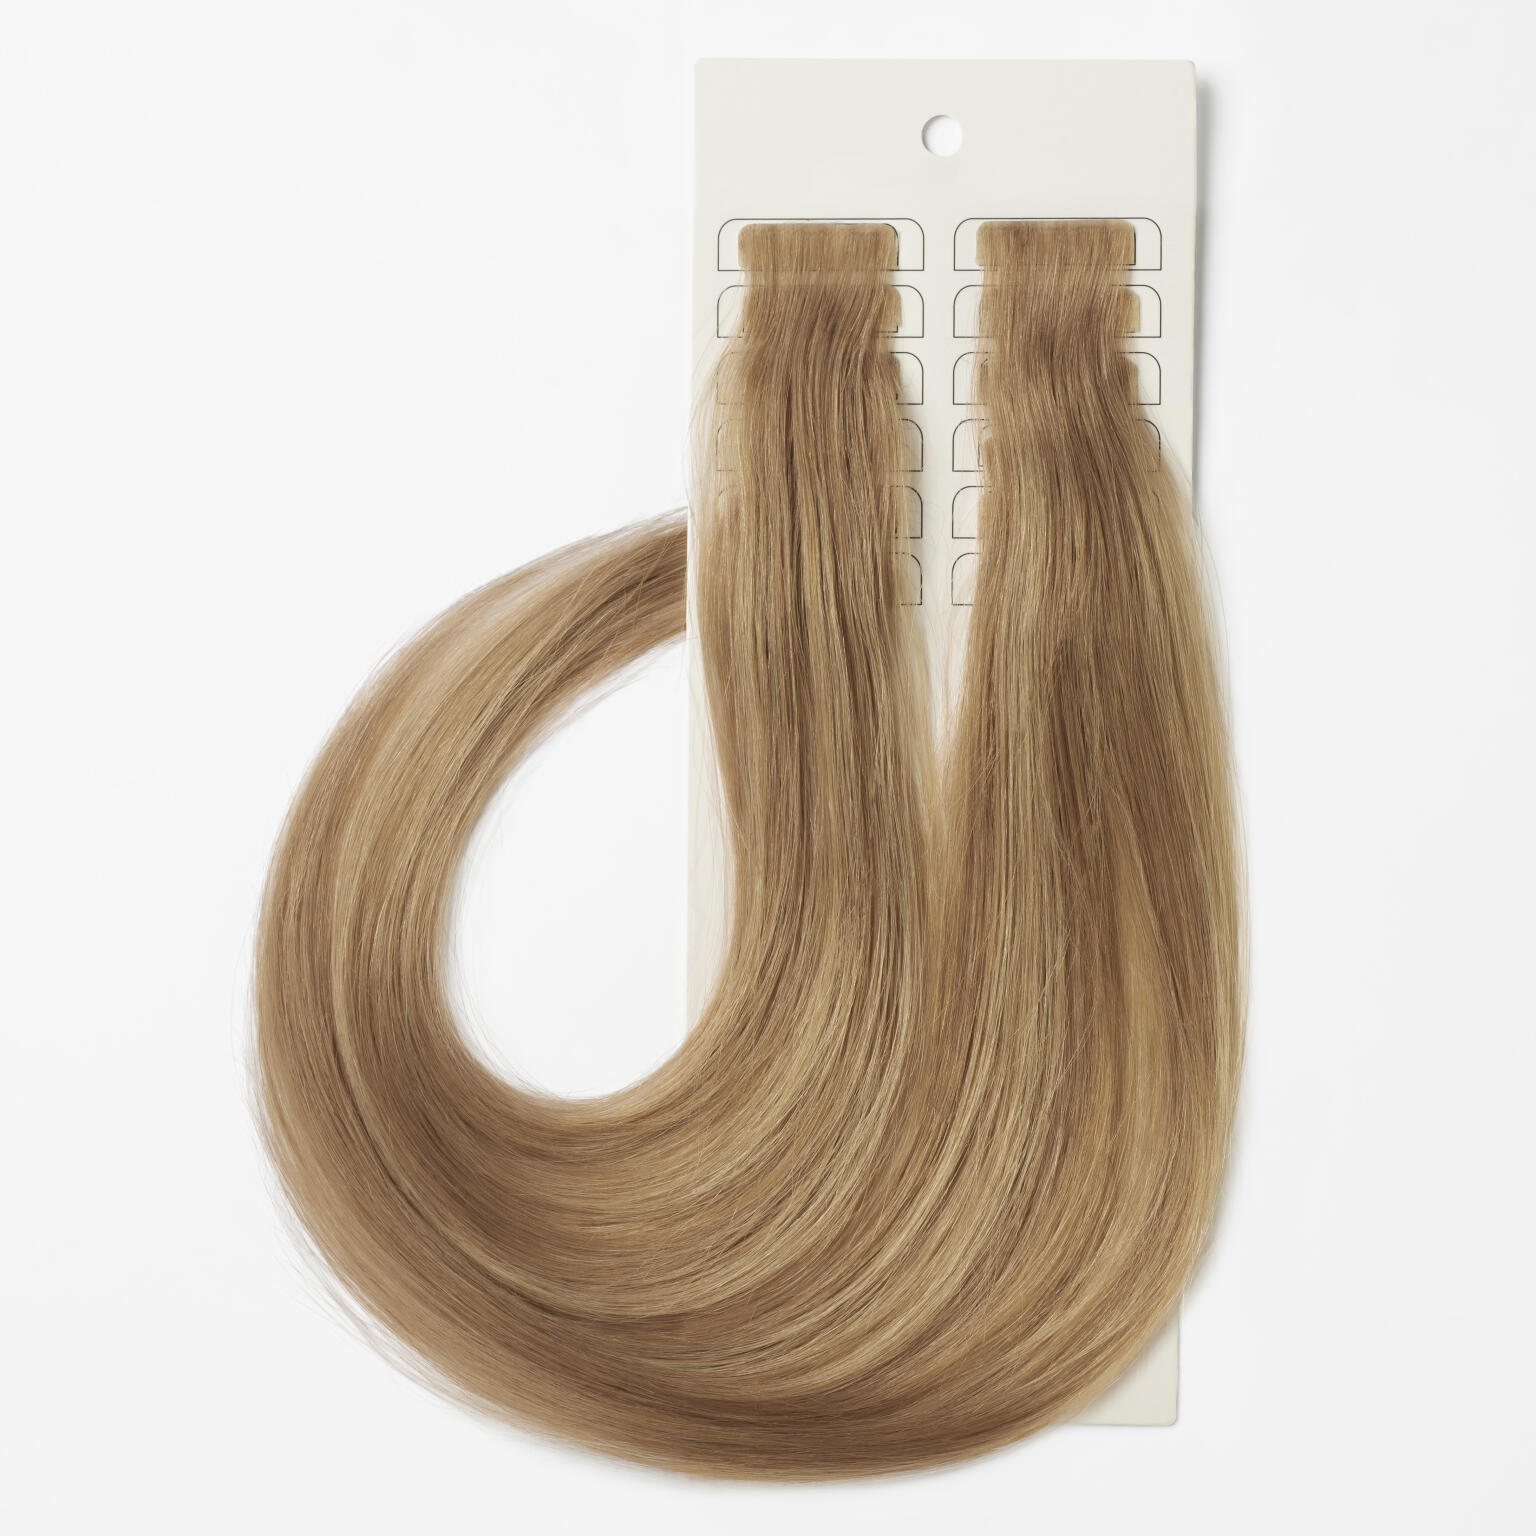 Luxe Tape Extensions Seamless 3 CM9.89/10.89 40 cm